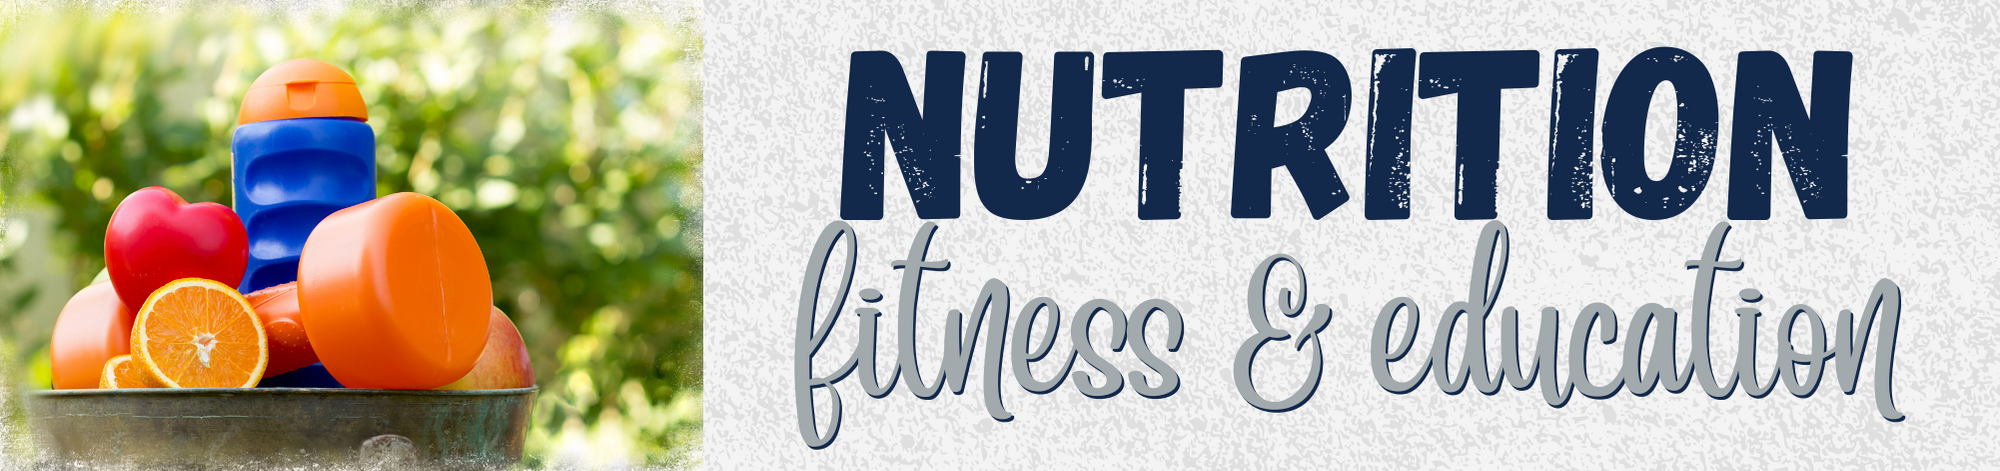 Nutrition Fitness and Education Graphic